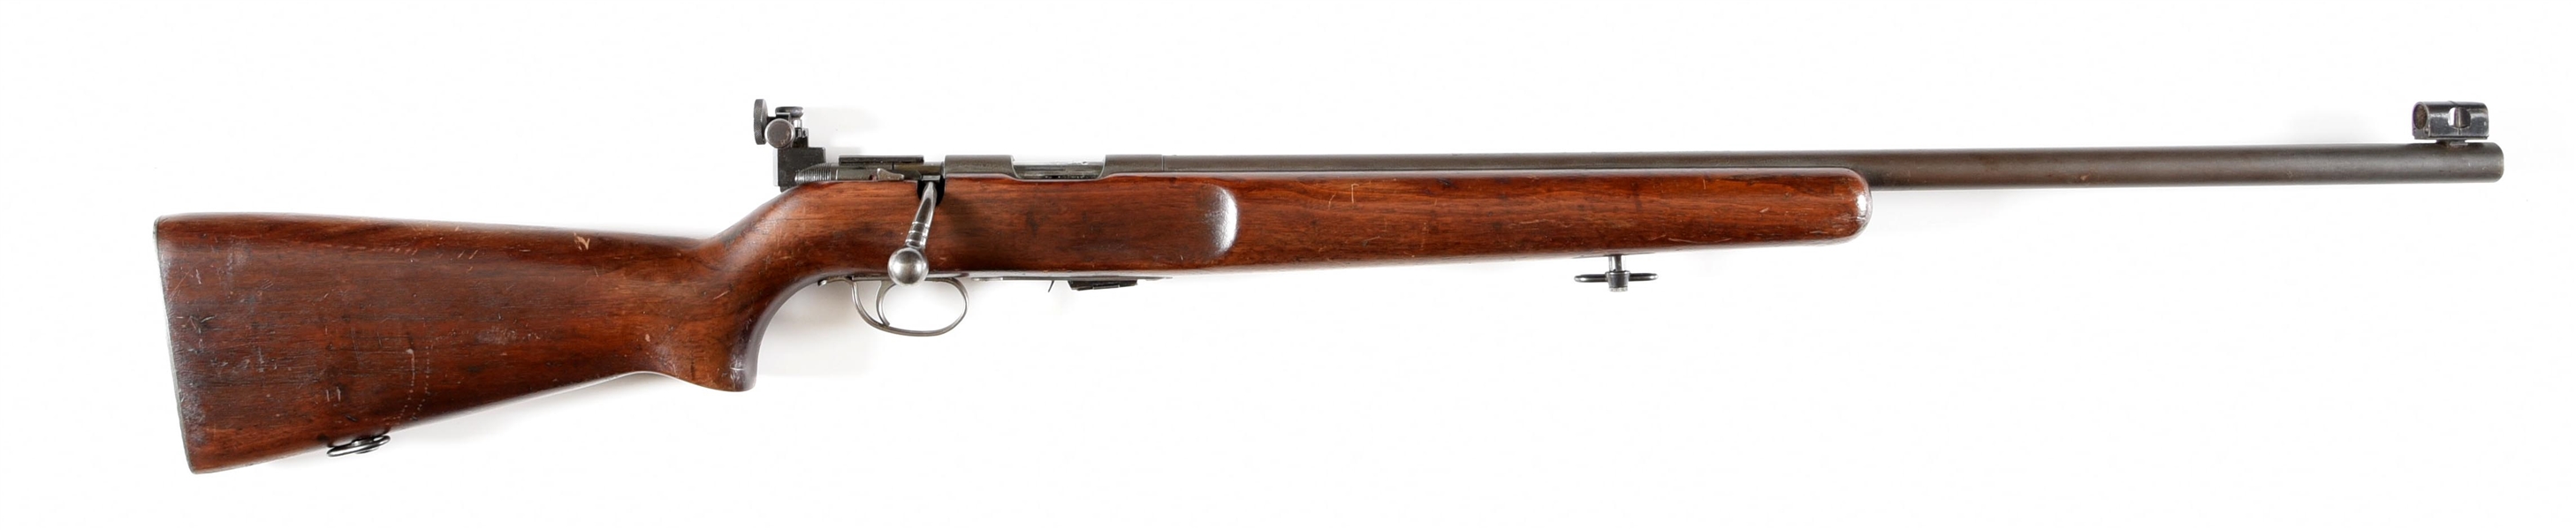 (C) REMINGTON 513-T MATCHMASTER BOLT ACTION RIFLE WITH U.S. INSPECTOR MARKS.